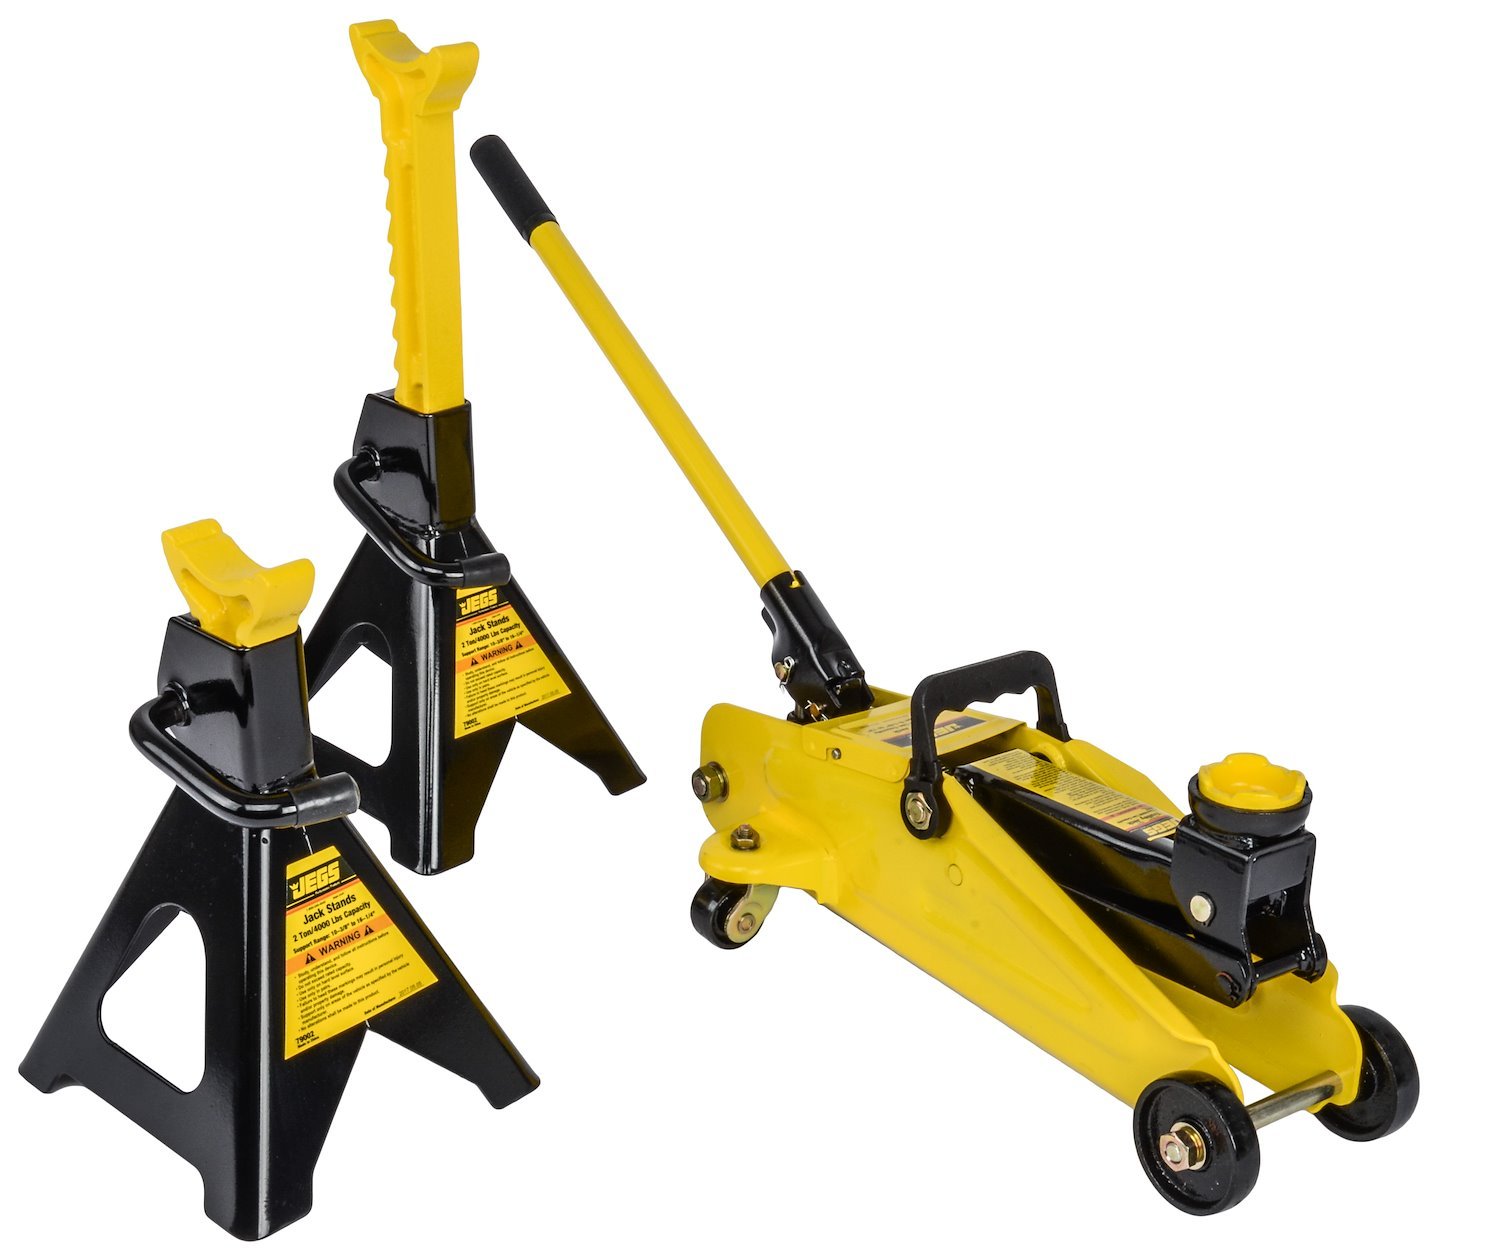 Hydraulic Utility Floor Jack and Jack Stands [2-Ton